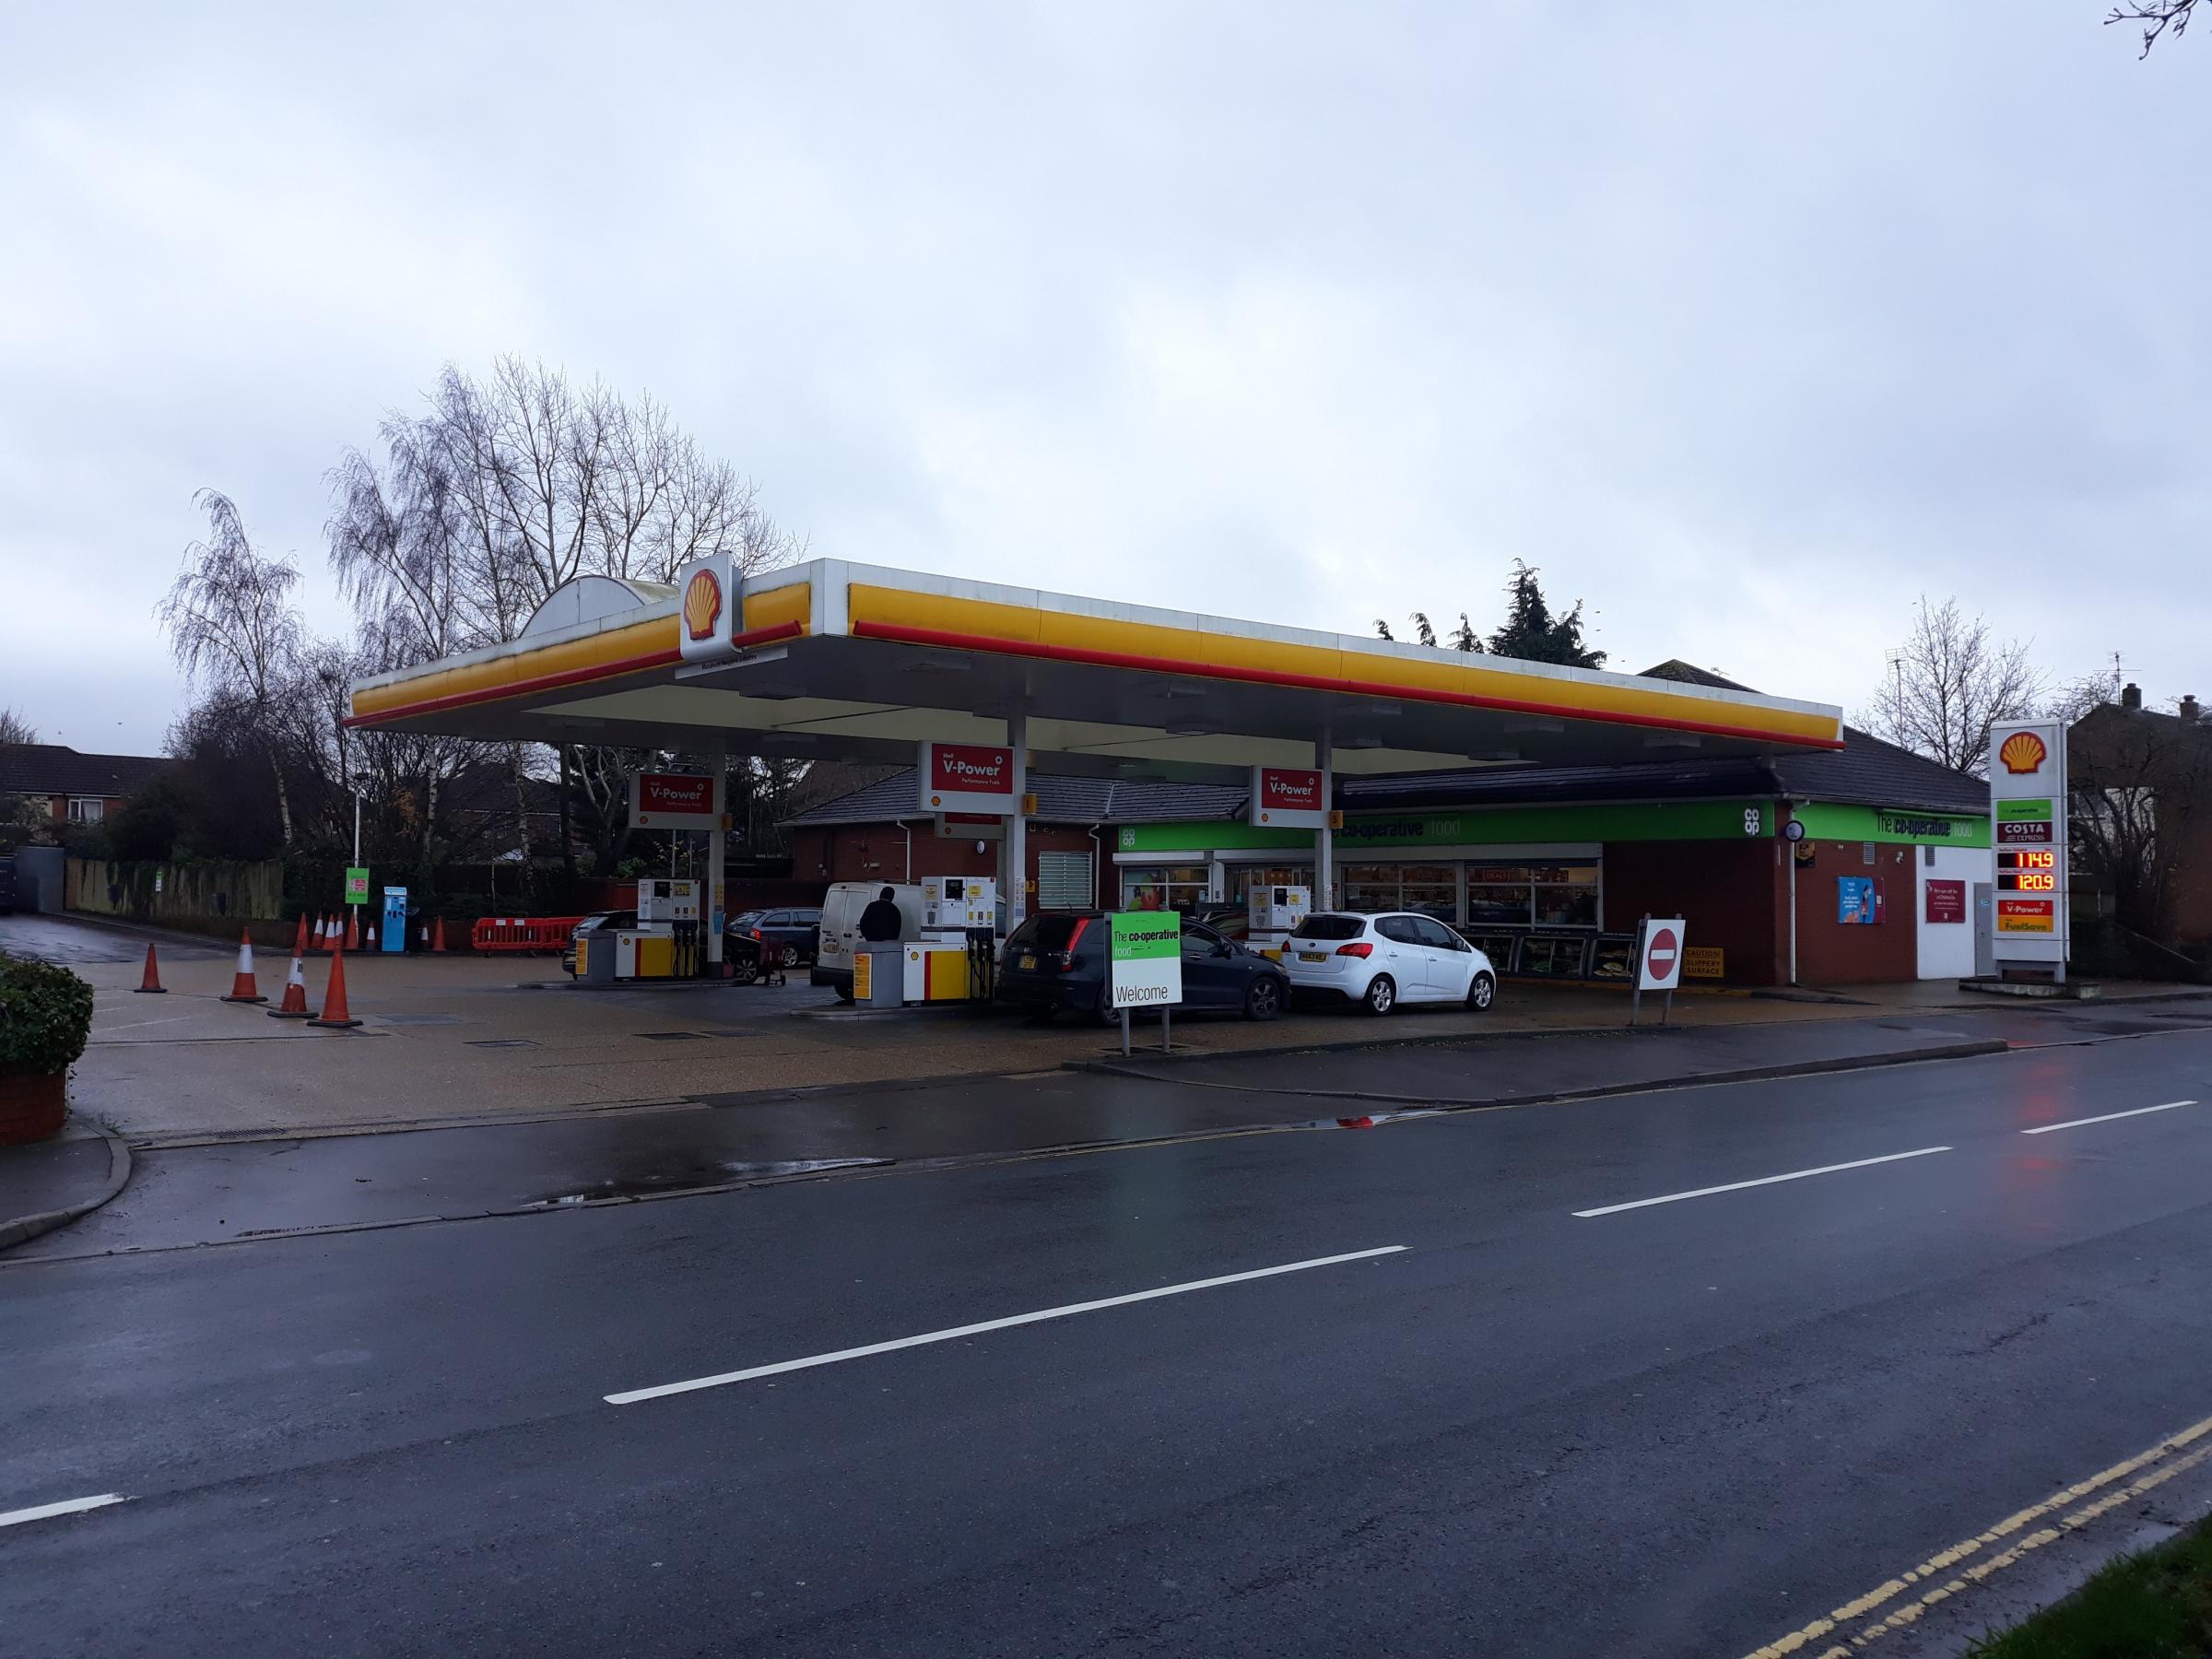 Monksbrook service station on Passfield Avenue, Eastleigh